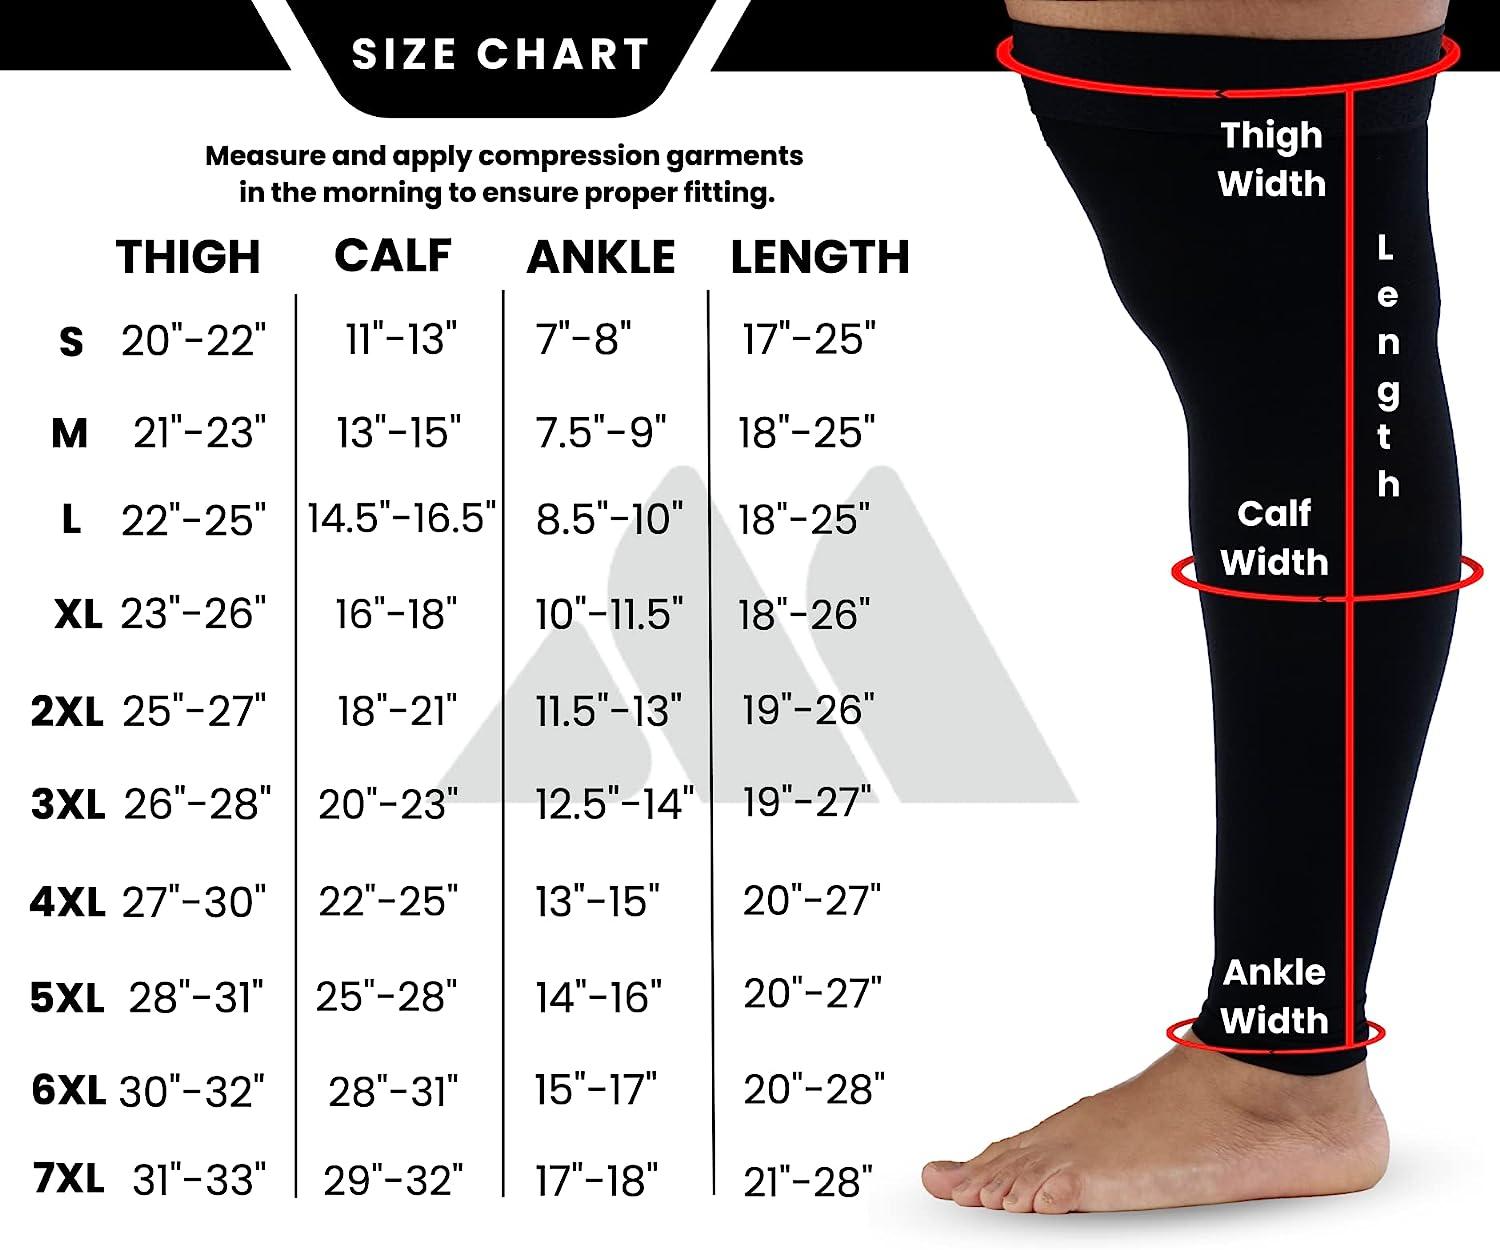 Mojo Compression Socks - 7XL Thigh-High Stockings with Grip Top